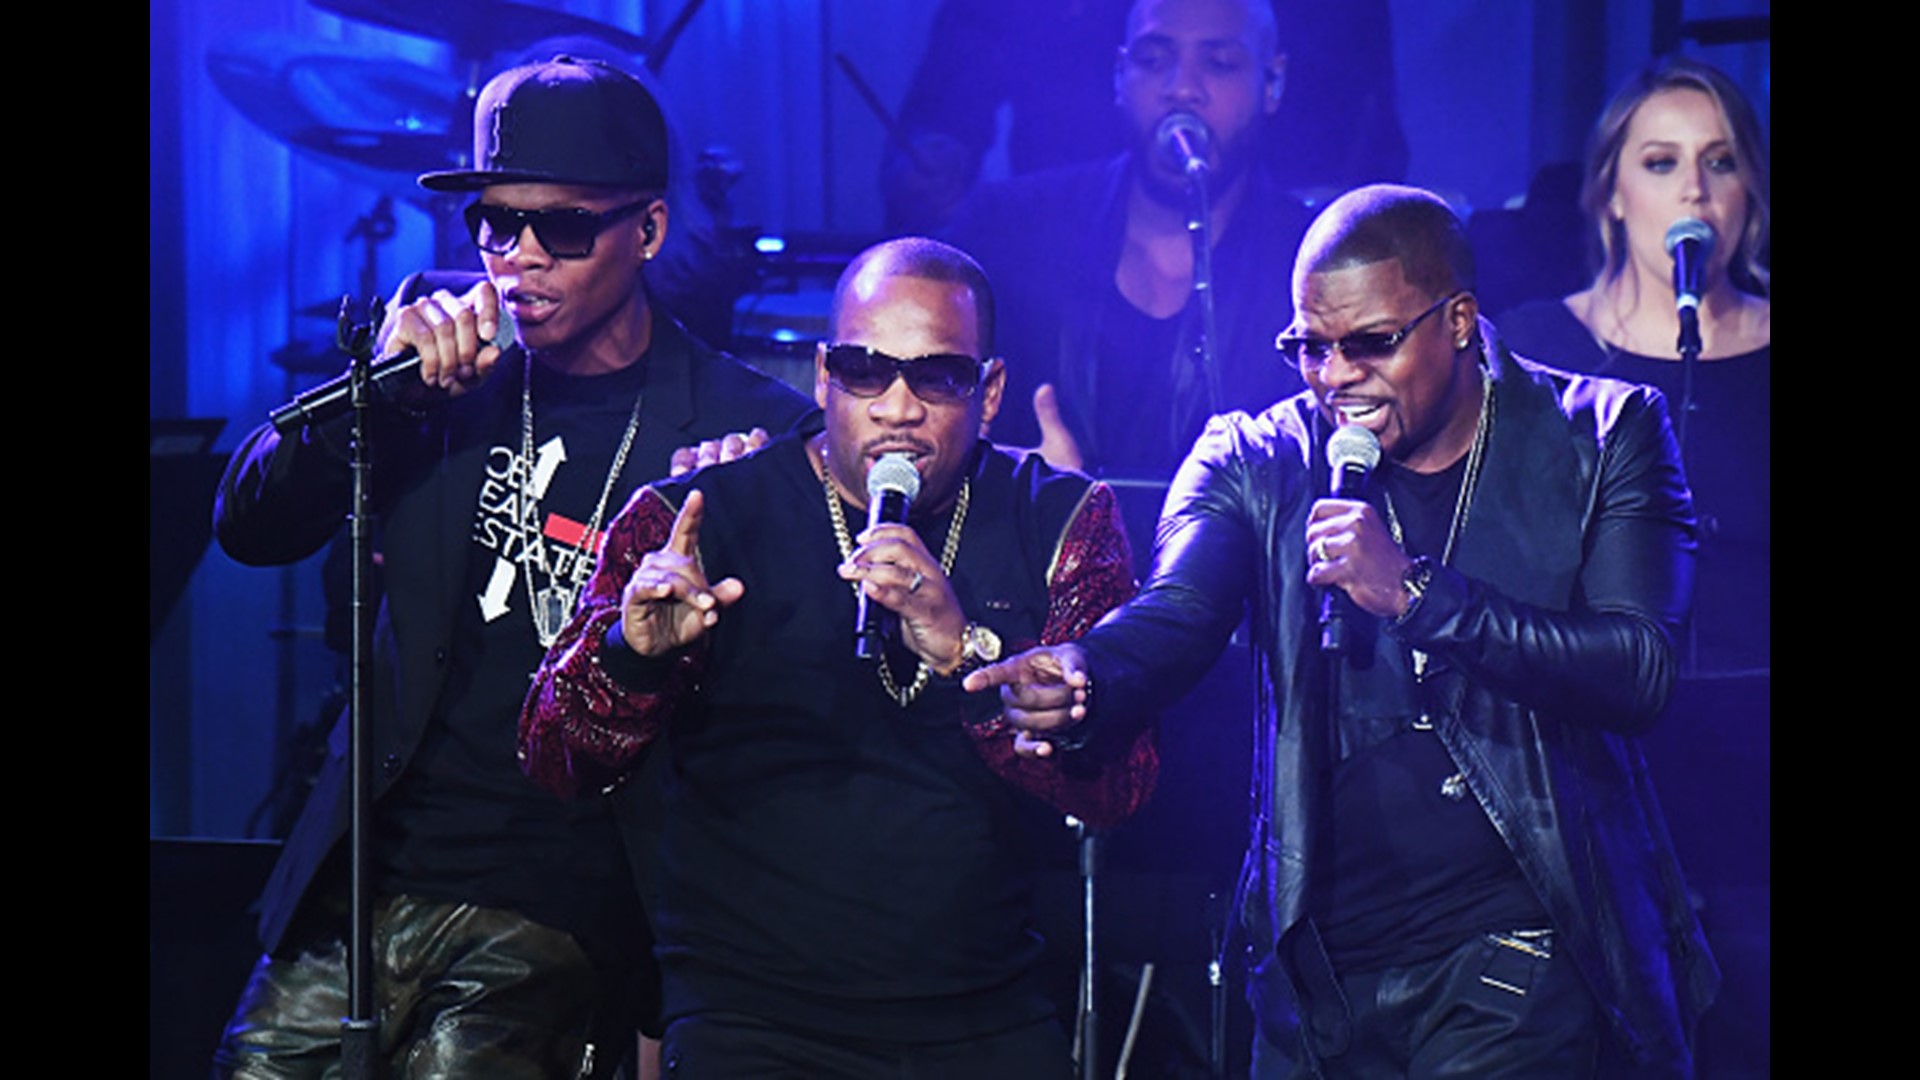 Bell Biv DeVoe was scheduled to play at the Florida Theatre at 8 p.m. Monday. According to the venue, the show has been canceled "due to an unforeseen circumstance.